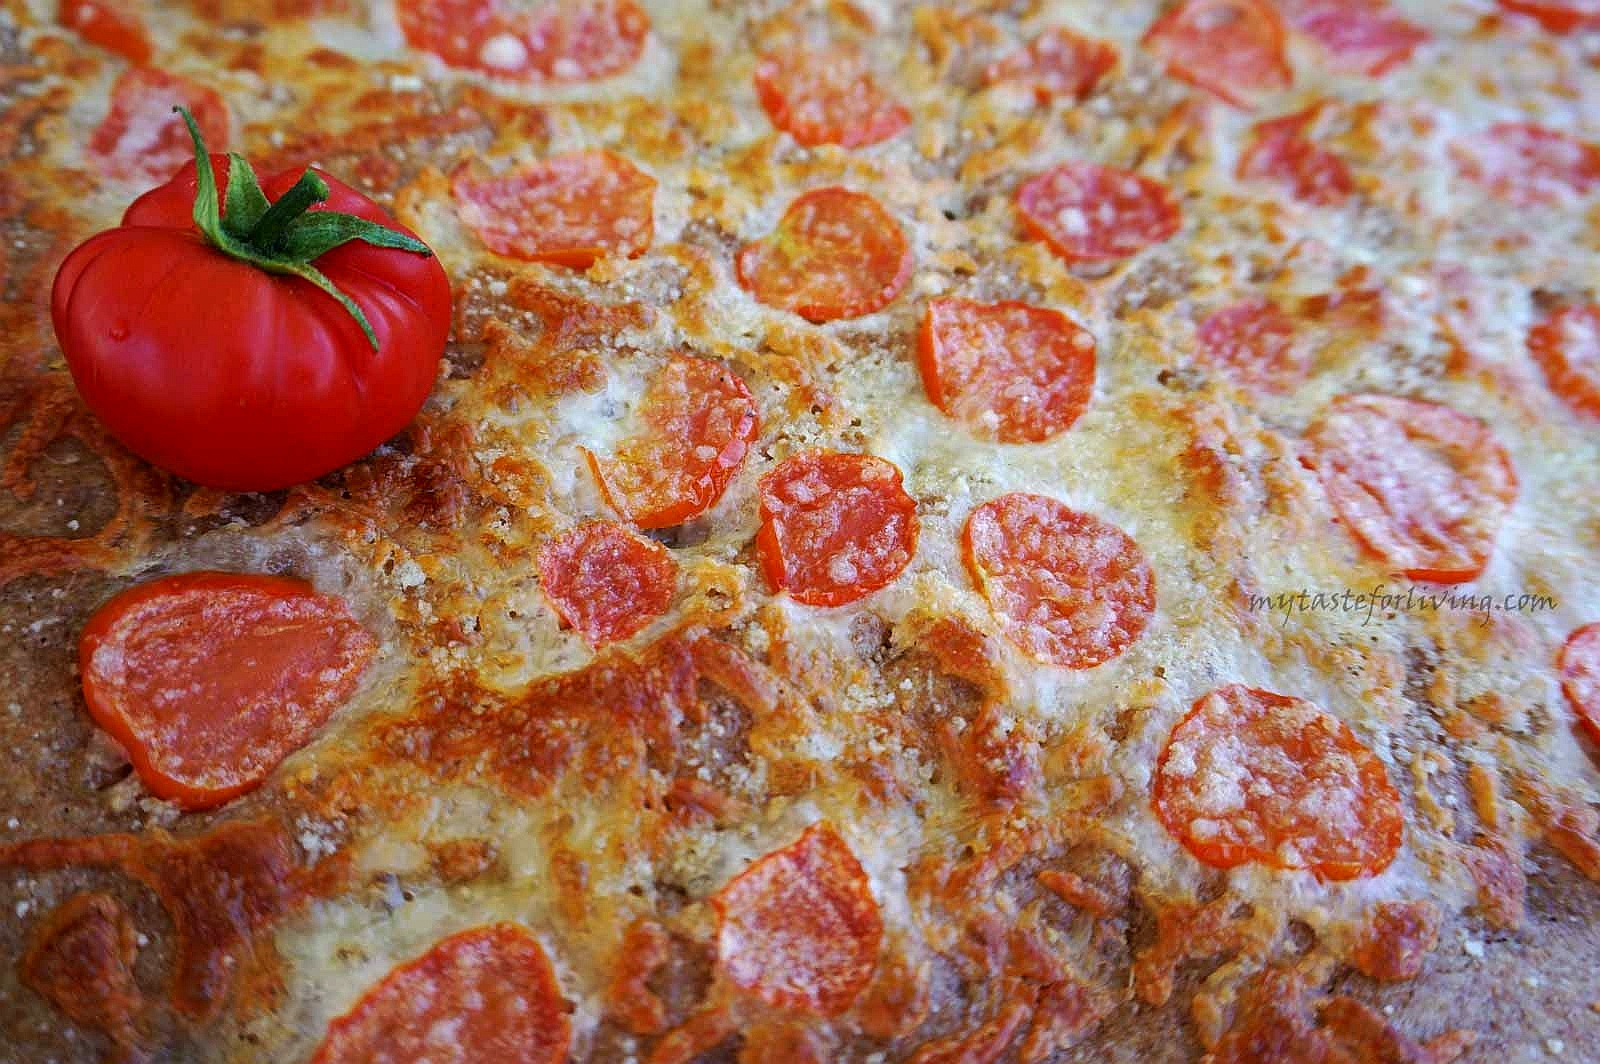 Easy and delicious whole wheat focaccia with tomatoes, mozzarella and parmesan.